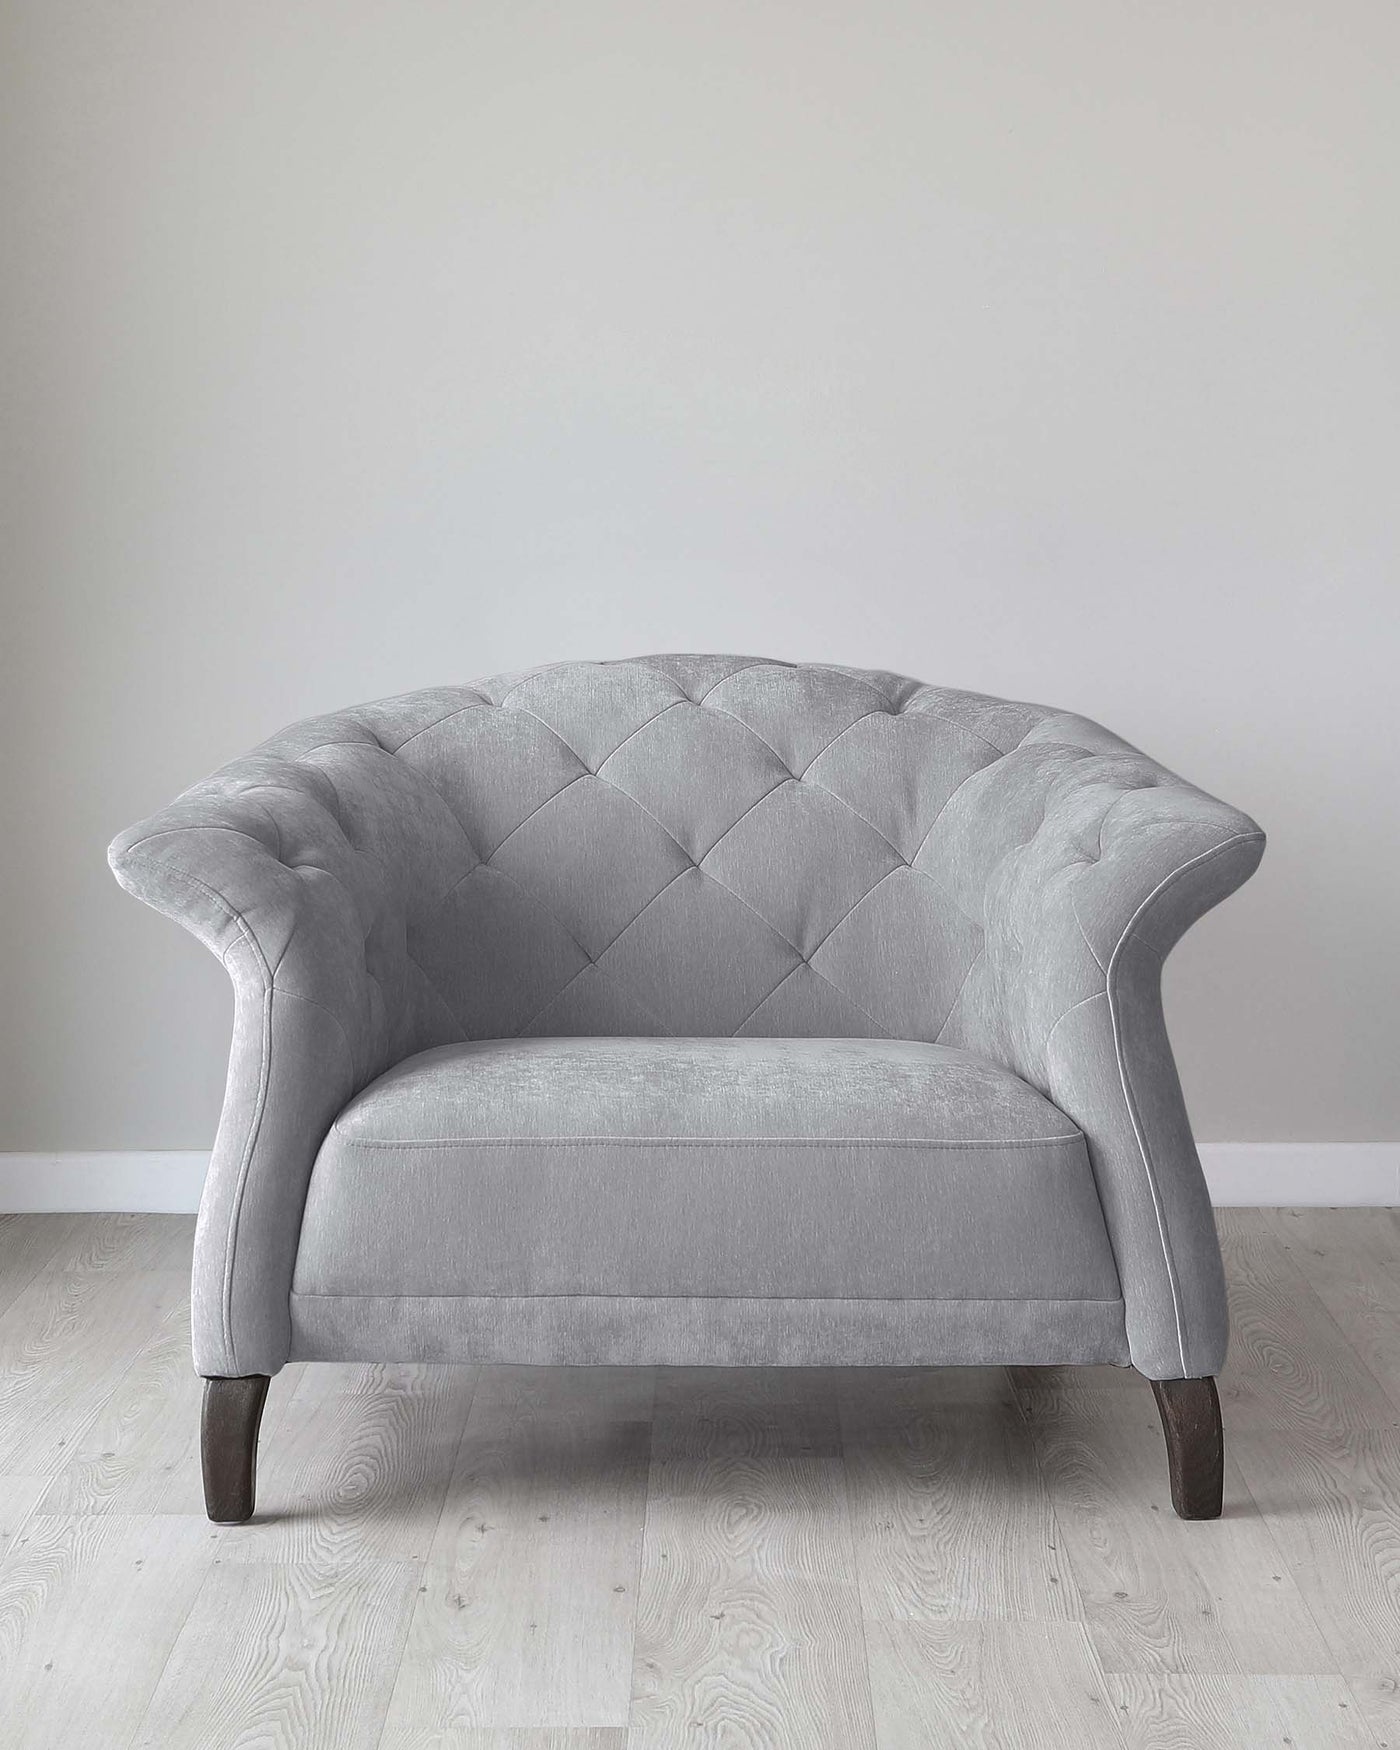 Elegant grey fabric loveseat with button-tufted backrest, curved armrests, and dark stained wooden legs standing on a light hardwood floor against a neutral wall.